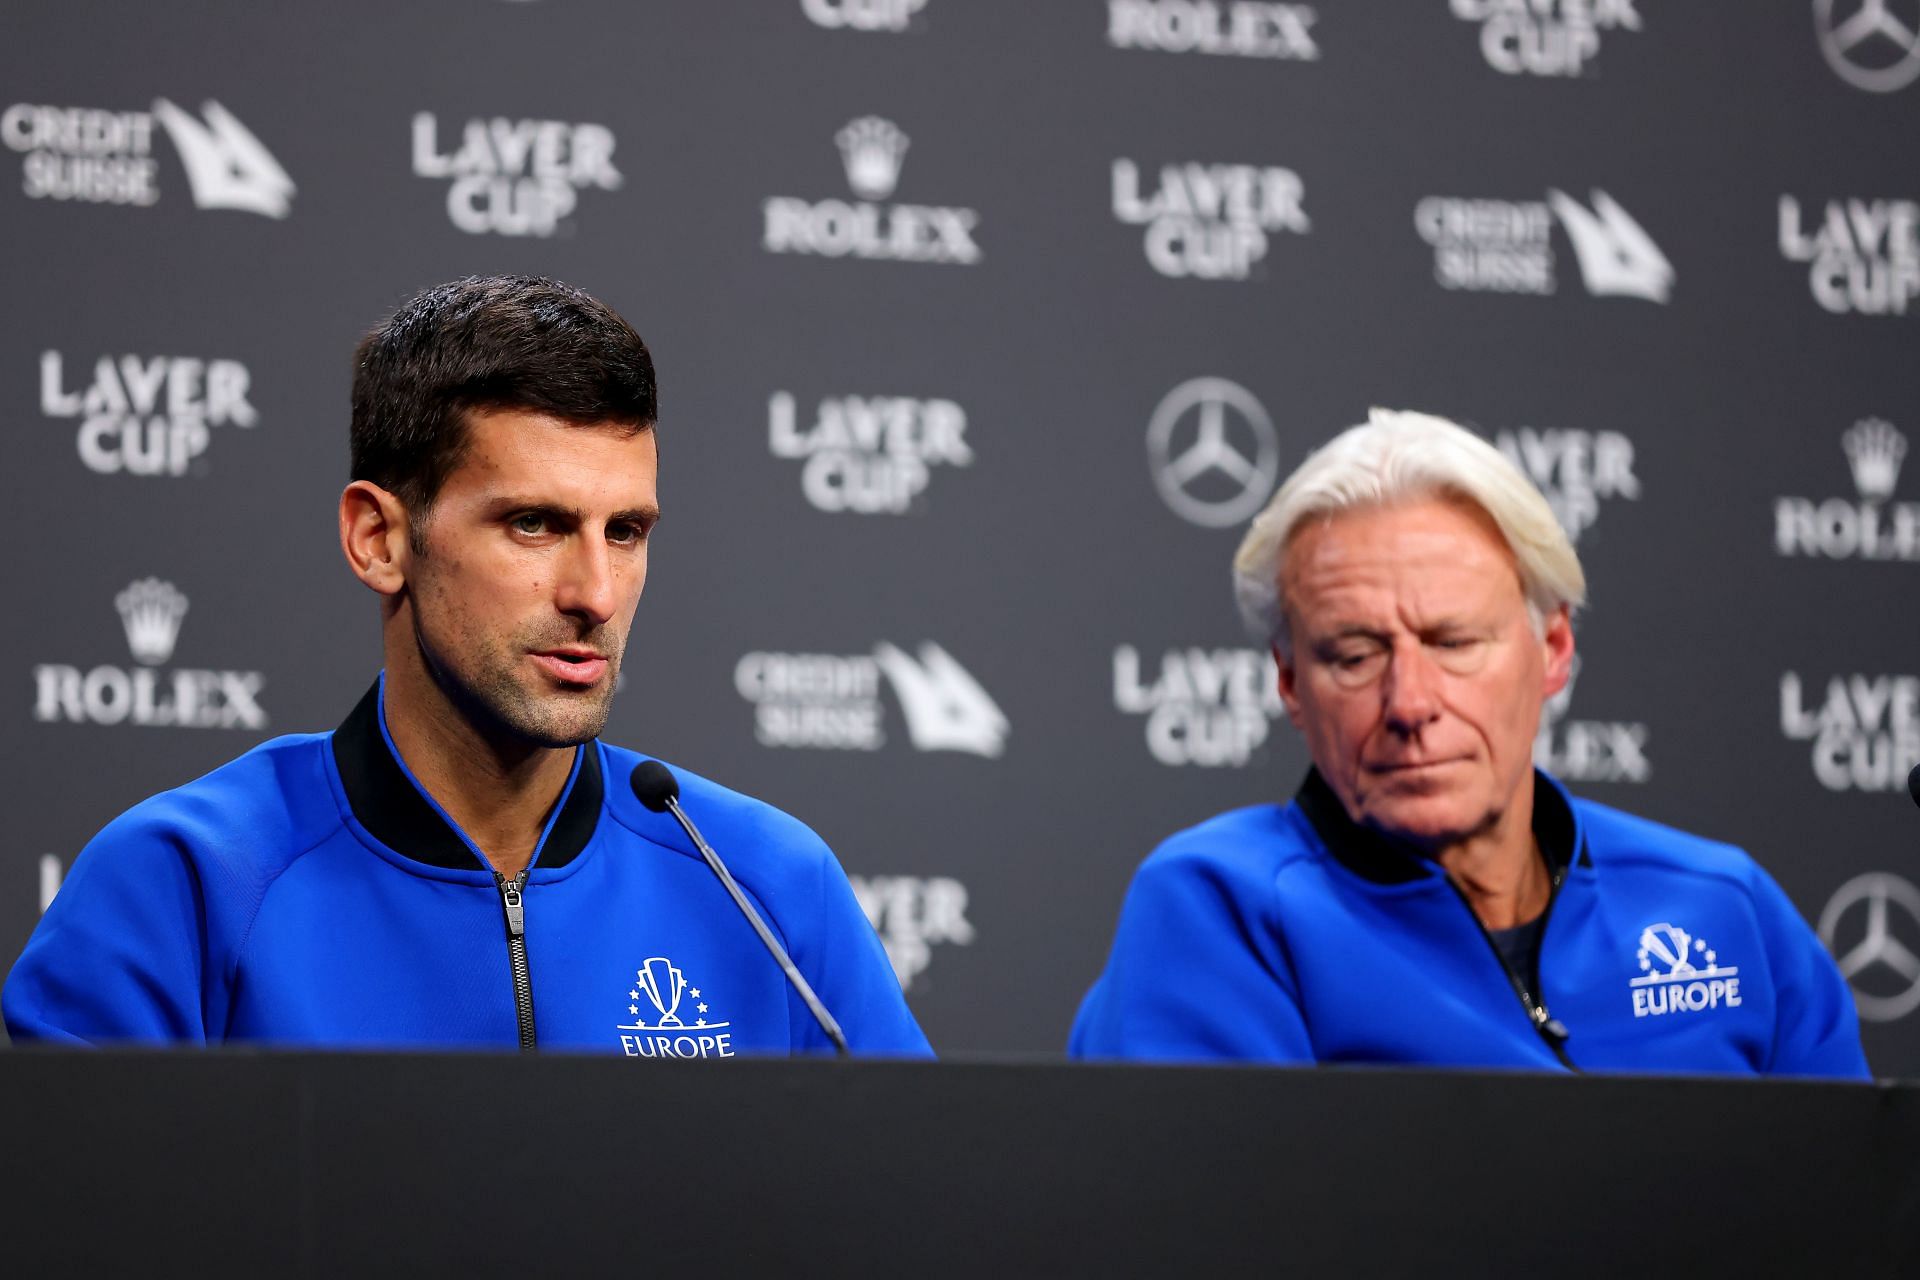 Team Europe at the Laver Cup 2022